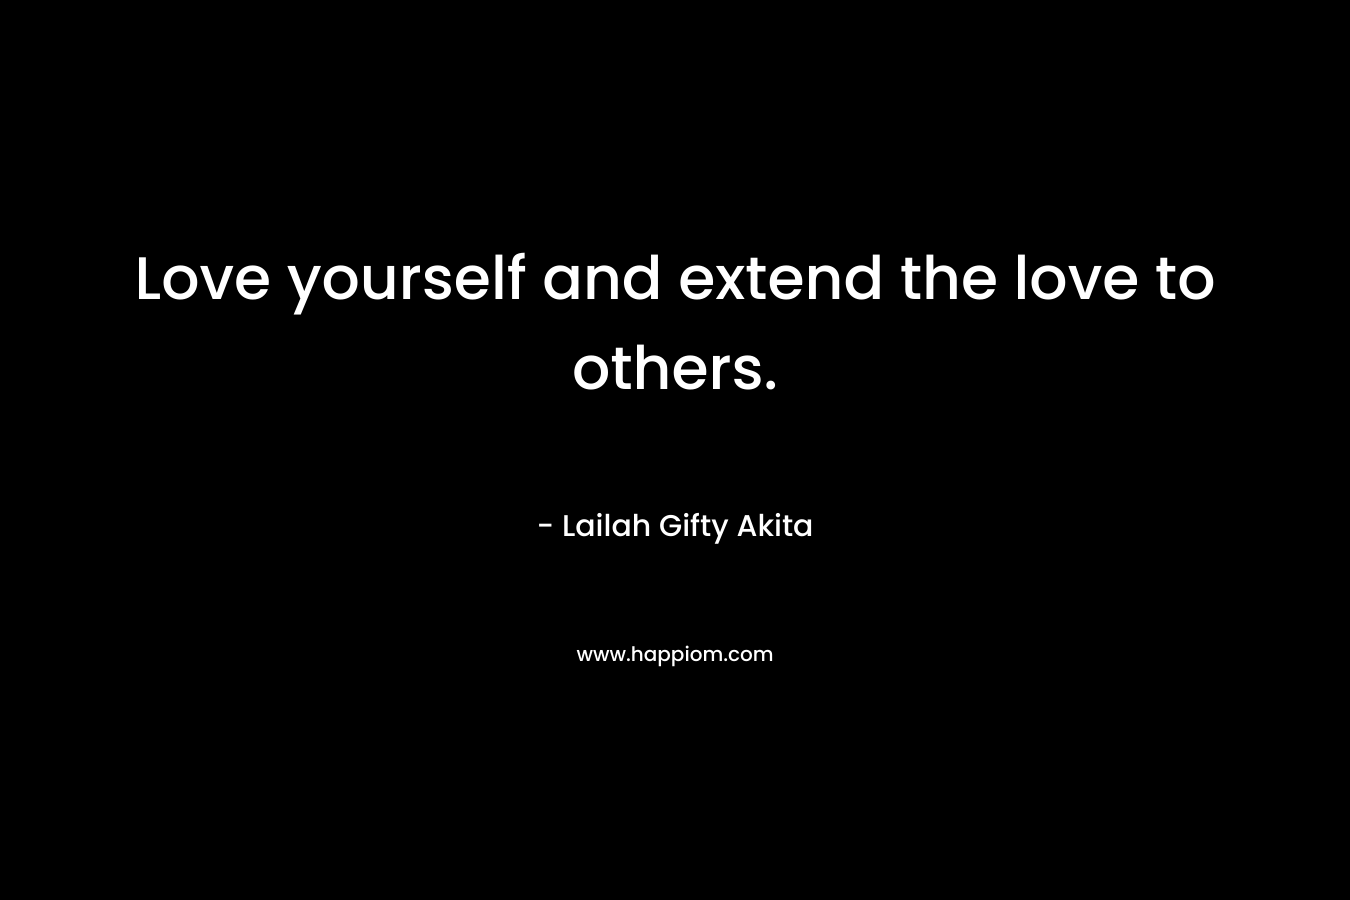 Love yourself and extend the love to others.